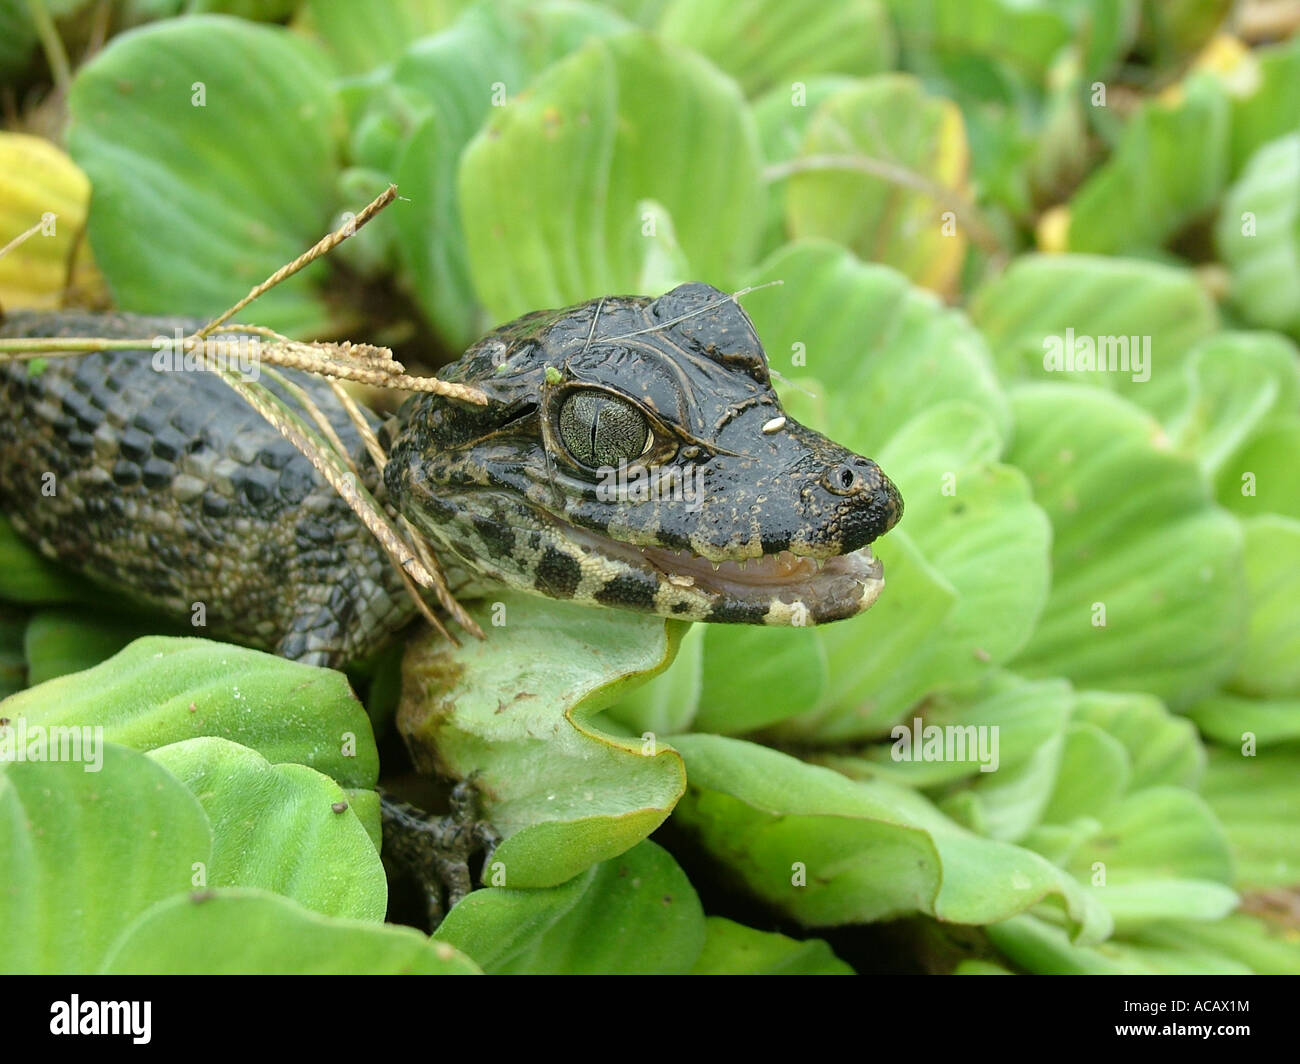 Portrait of a young Caiman (Caiman yacare) sitting on aquatic plants, Gran Chaco, Paraguay Stock Photo